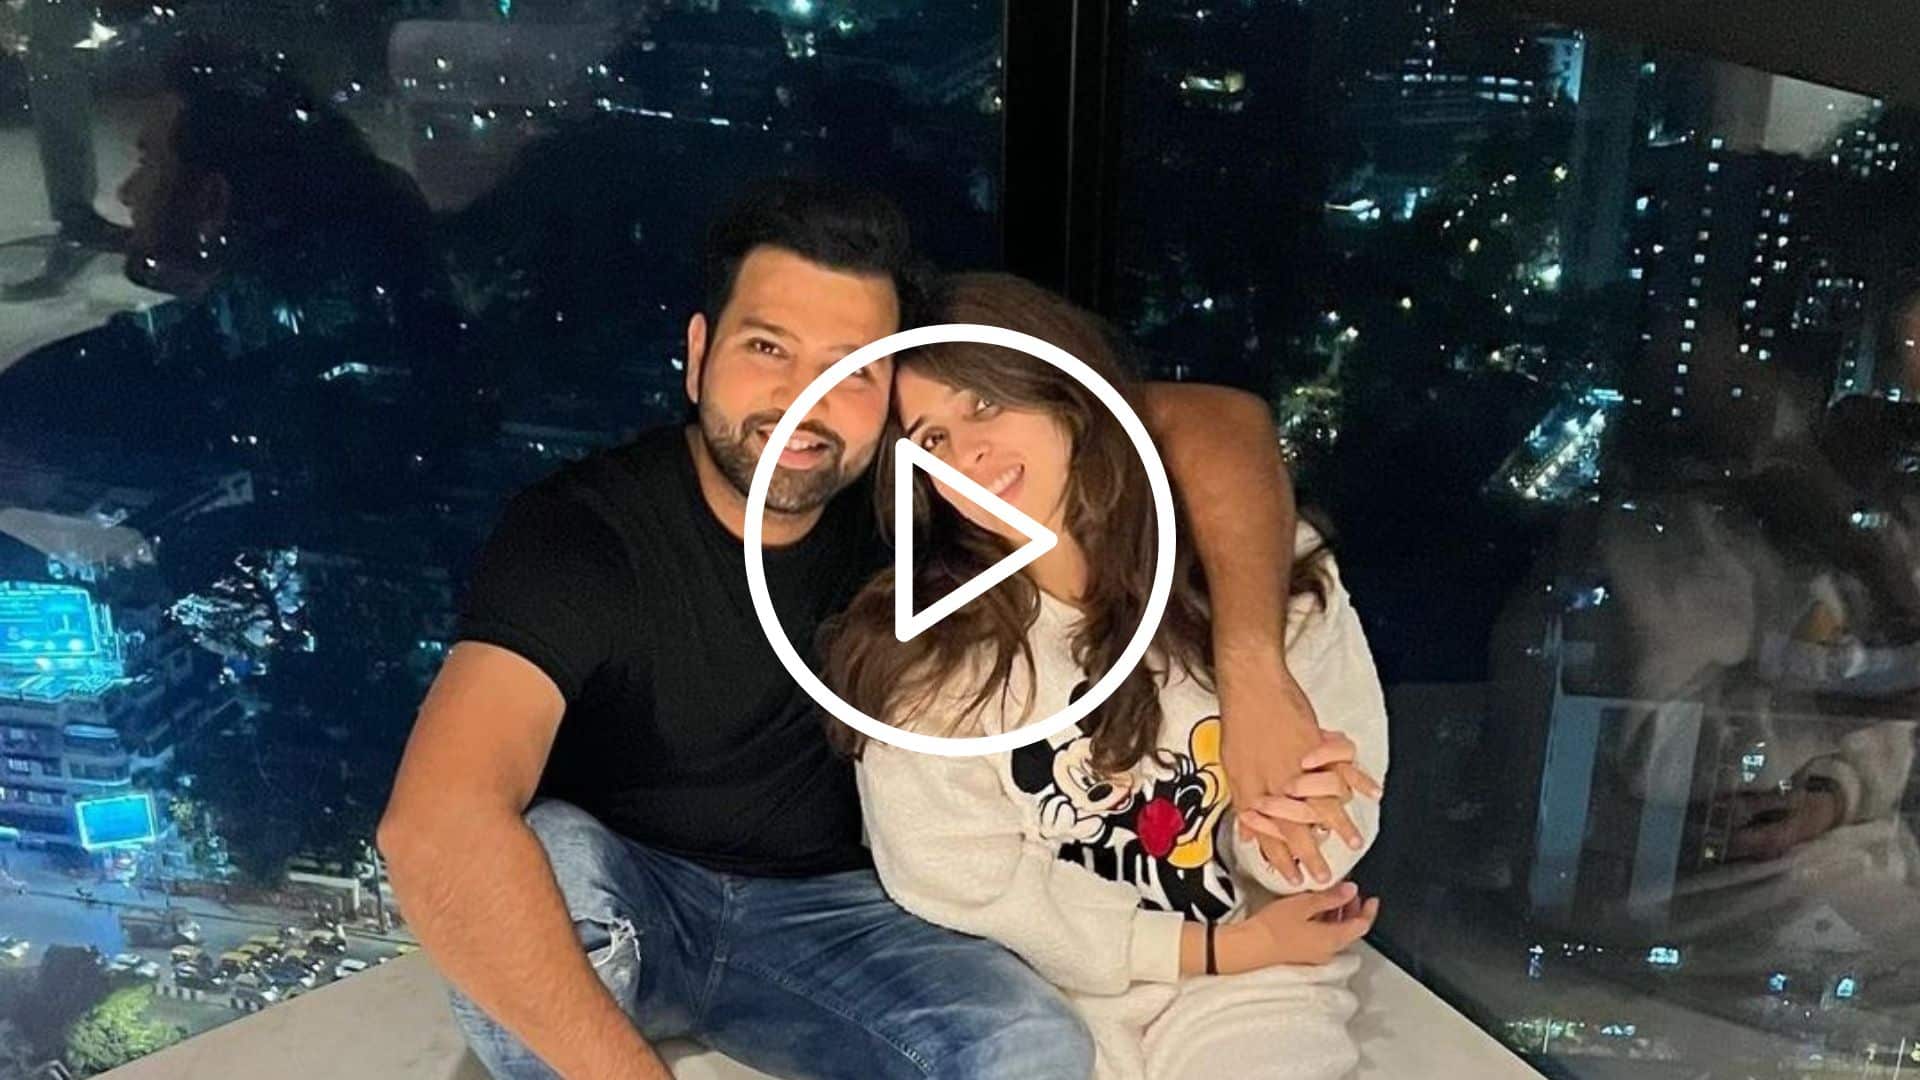 [Watch] When Ritika Sajdeh Interviewed Husband Rohit Sharma In A Wholesome Episode